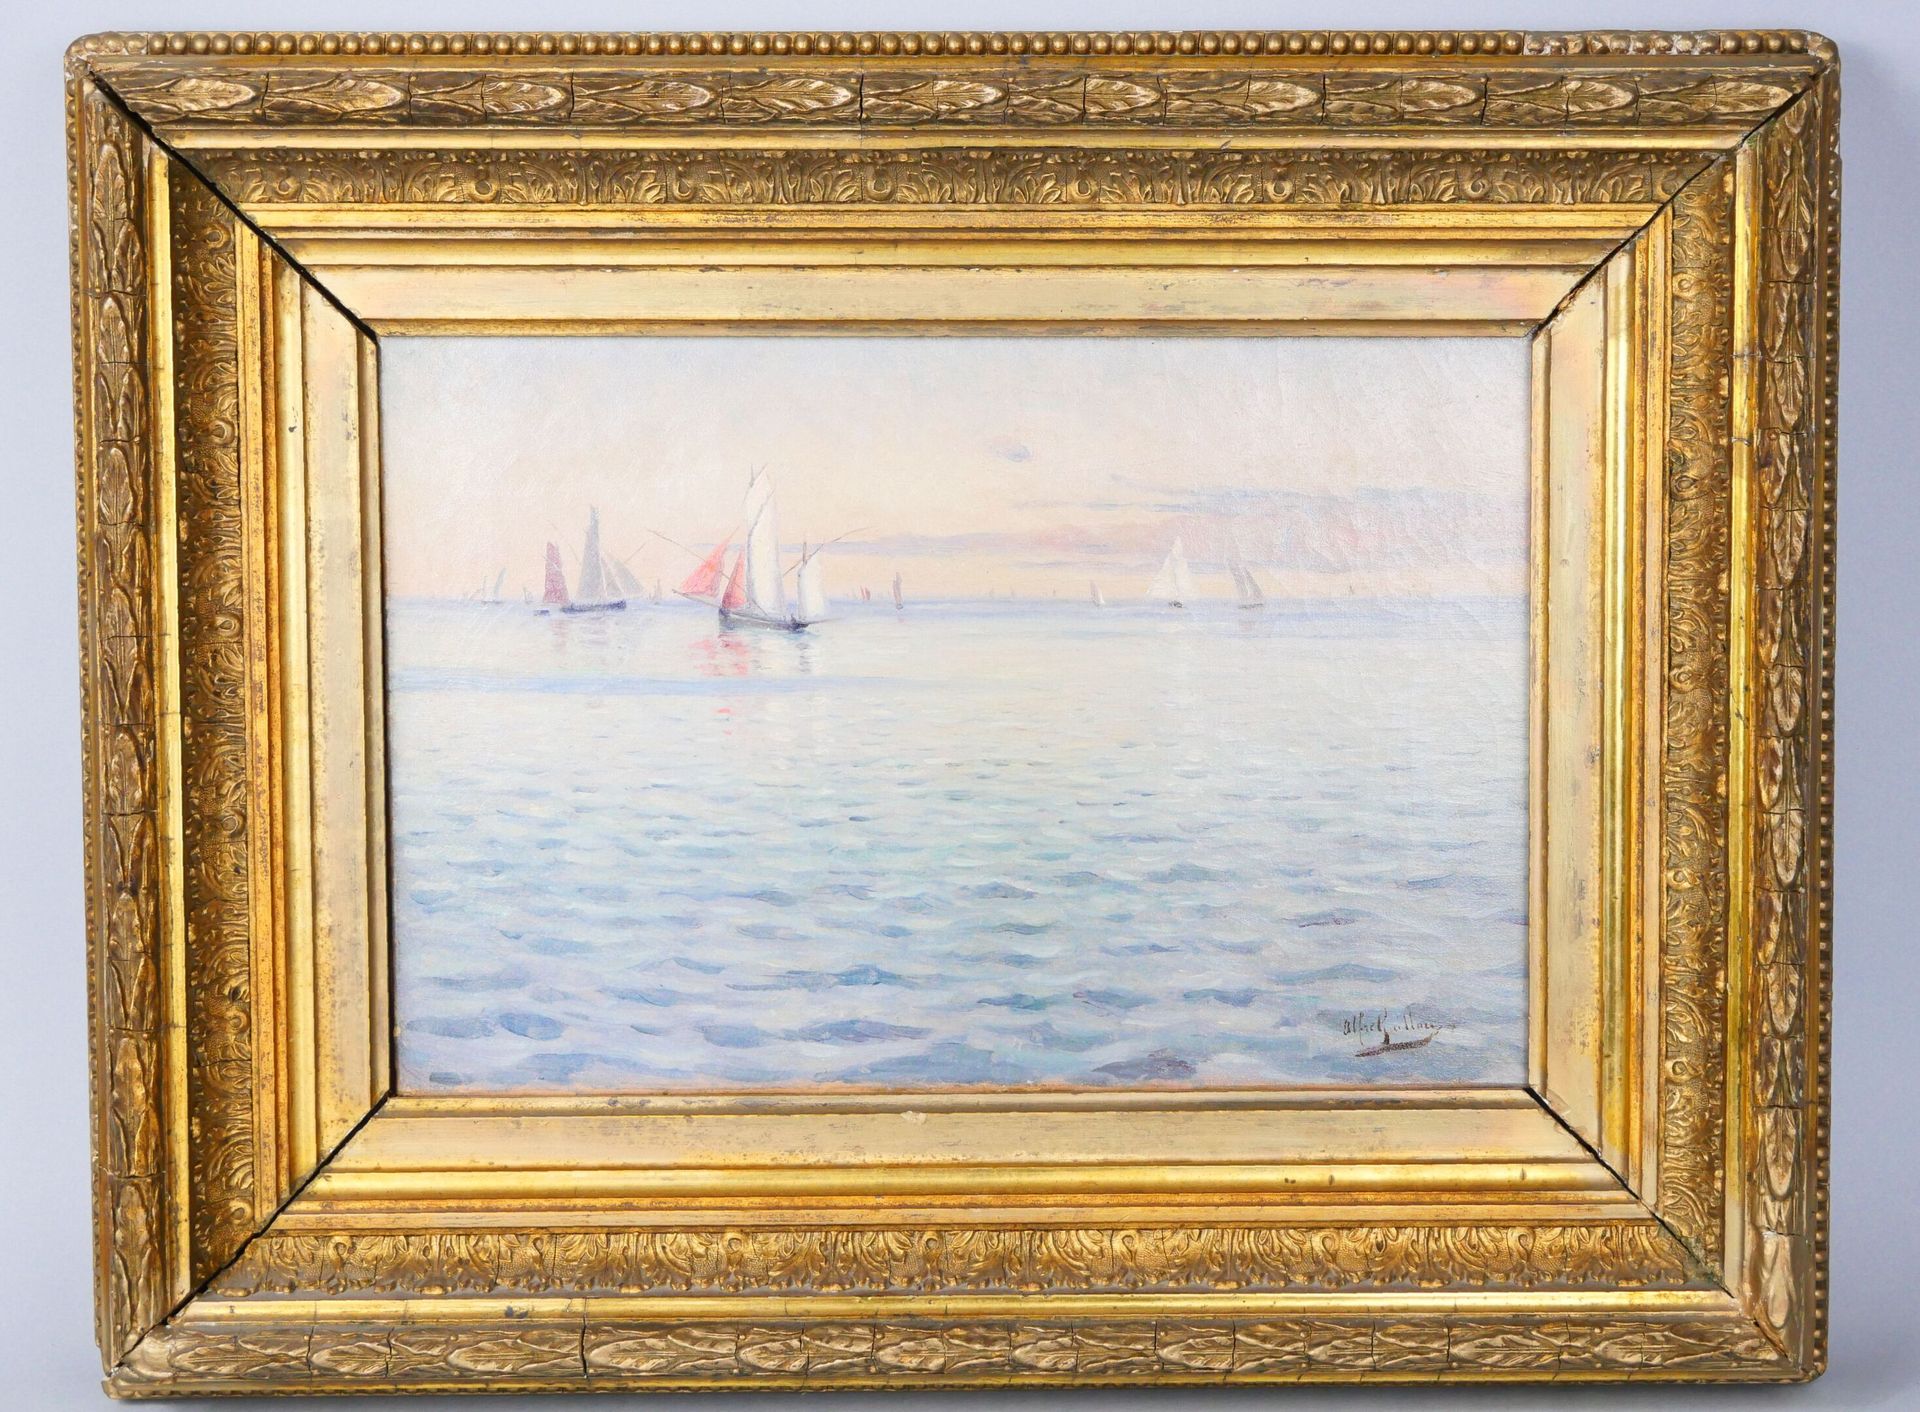 Null Alfred GUILLOU (1844-1926)
Marine 
Oil on canvas signed lower right
Dimensi&hellip;